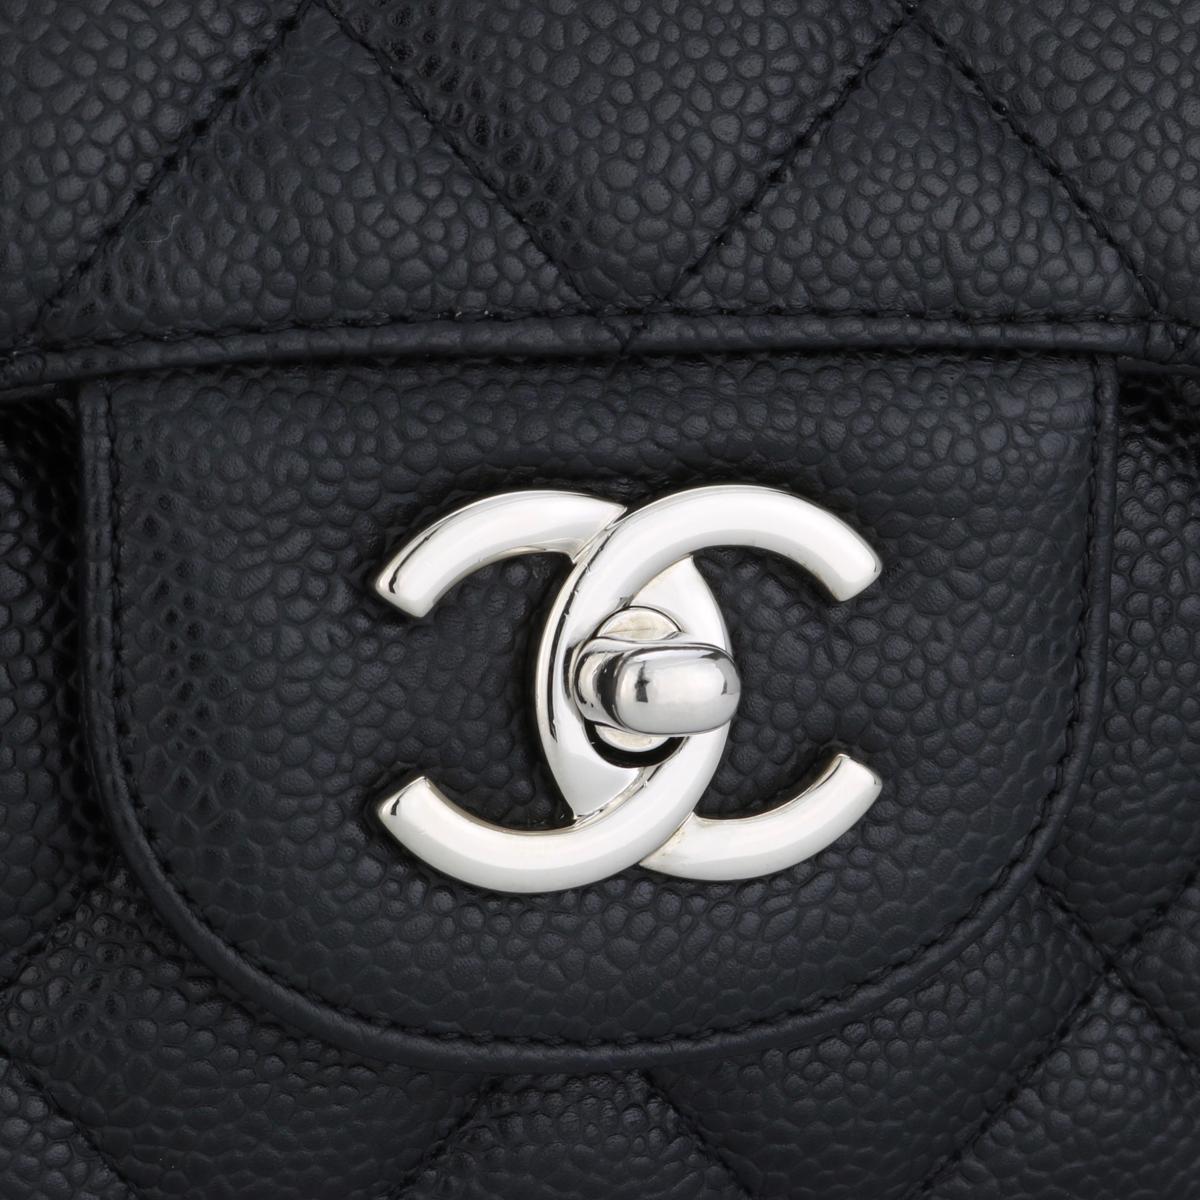 Women's or Men's CHANEL Single Flap Jumbo Bag in Black Caviar with Silver-Tone Hardware 2010 For Sale